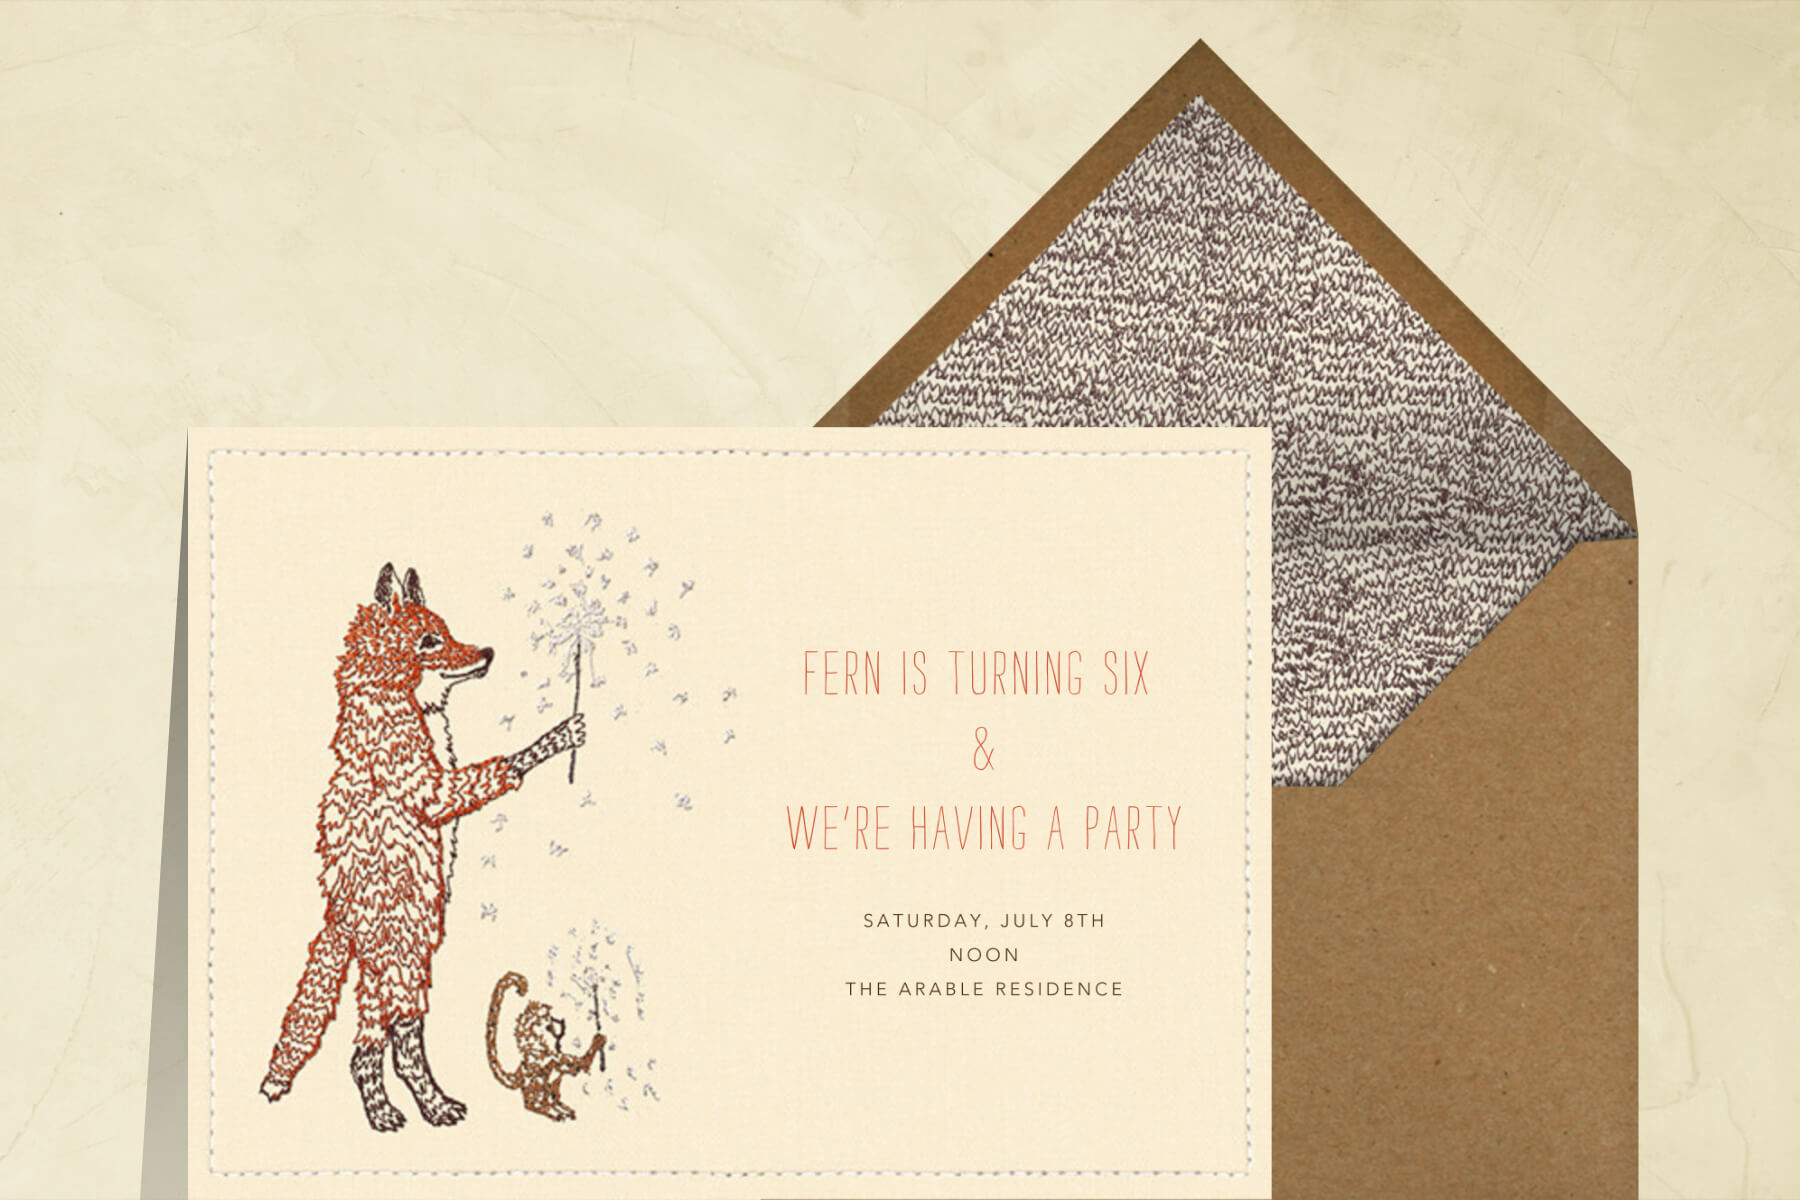 A party invitation featuring an embroidered illustration of a fox and a monkey lighting sparklers.